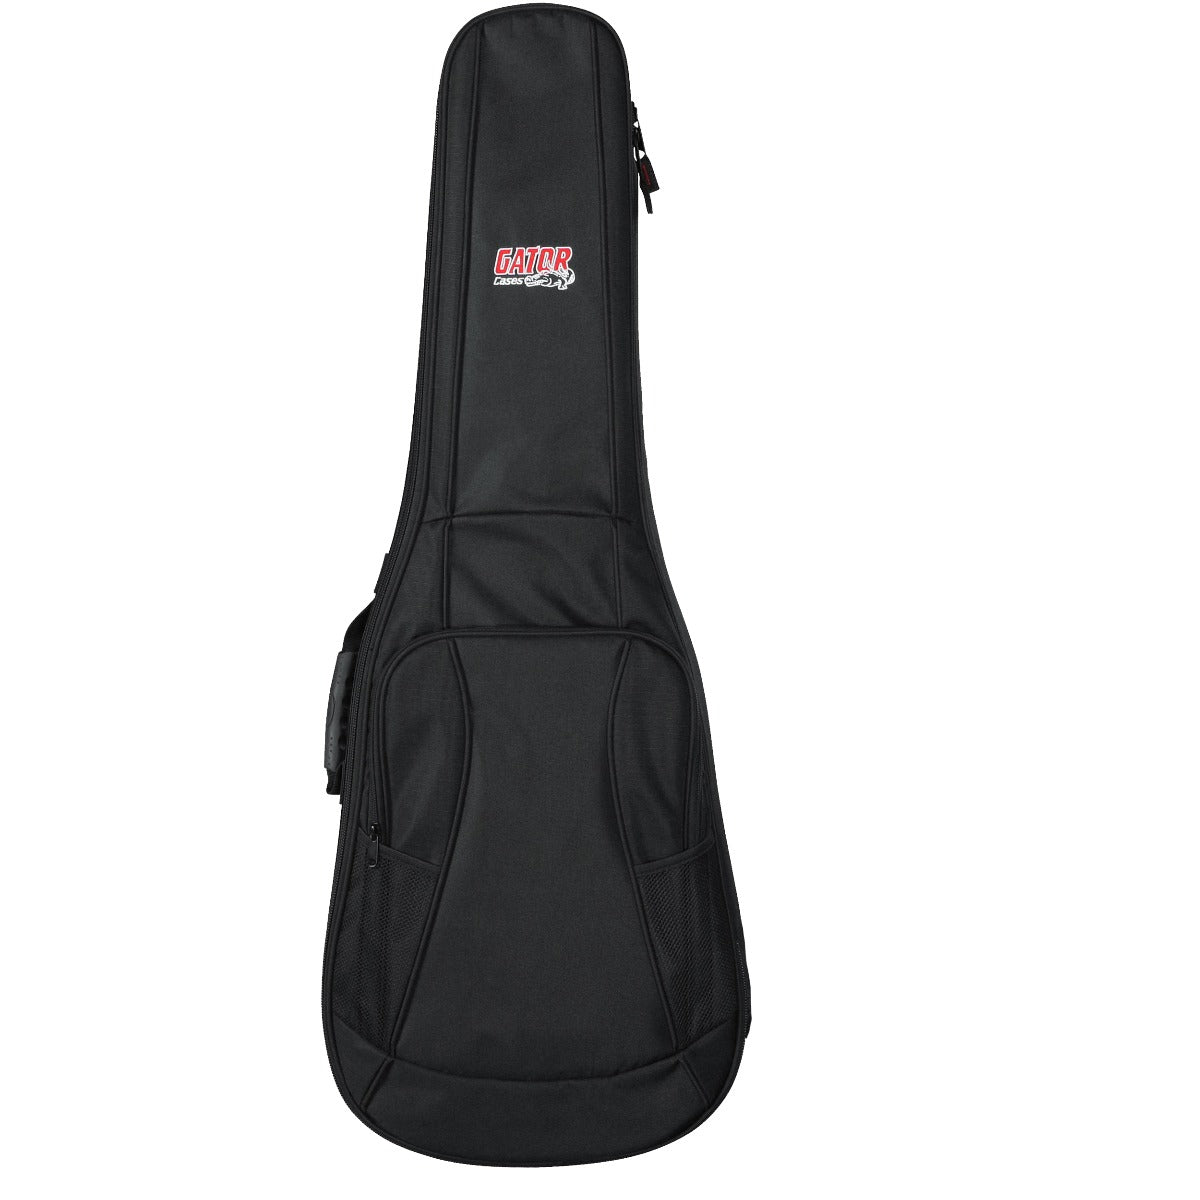 Gator Cases GB-4G-ELECTRIC Electric Guitar Gig Bag front view